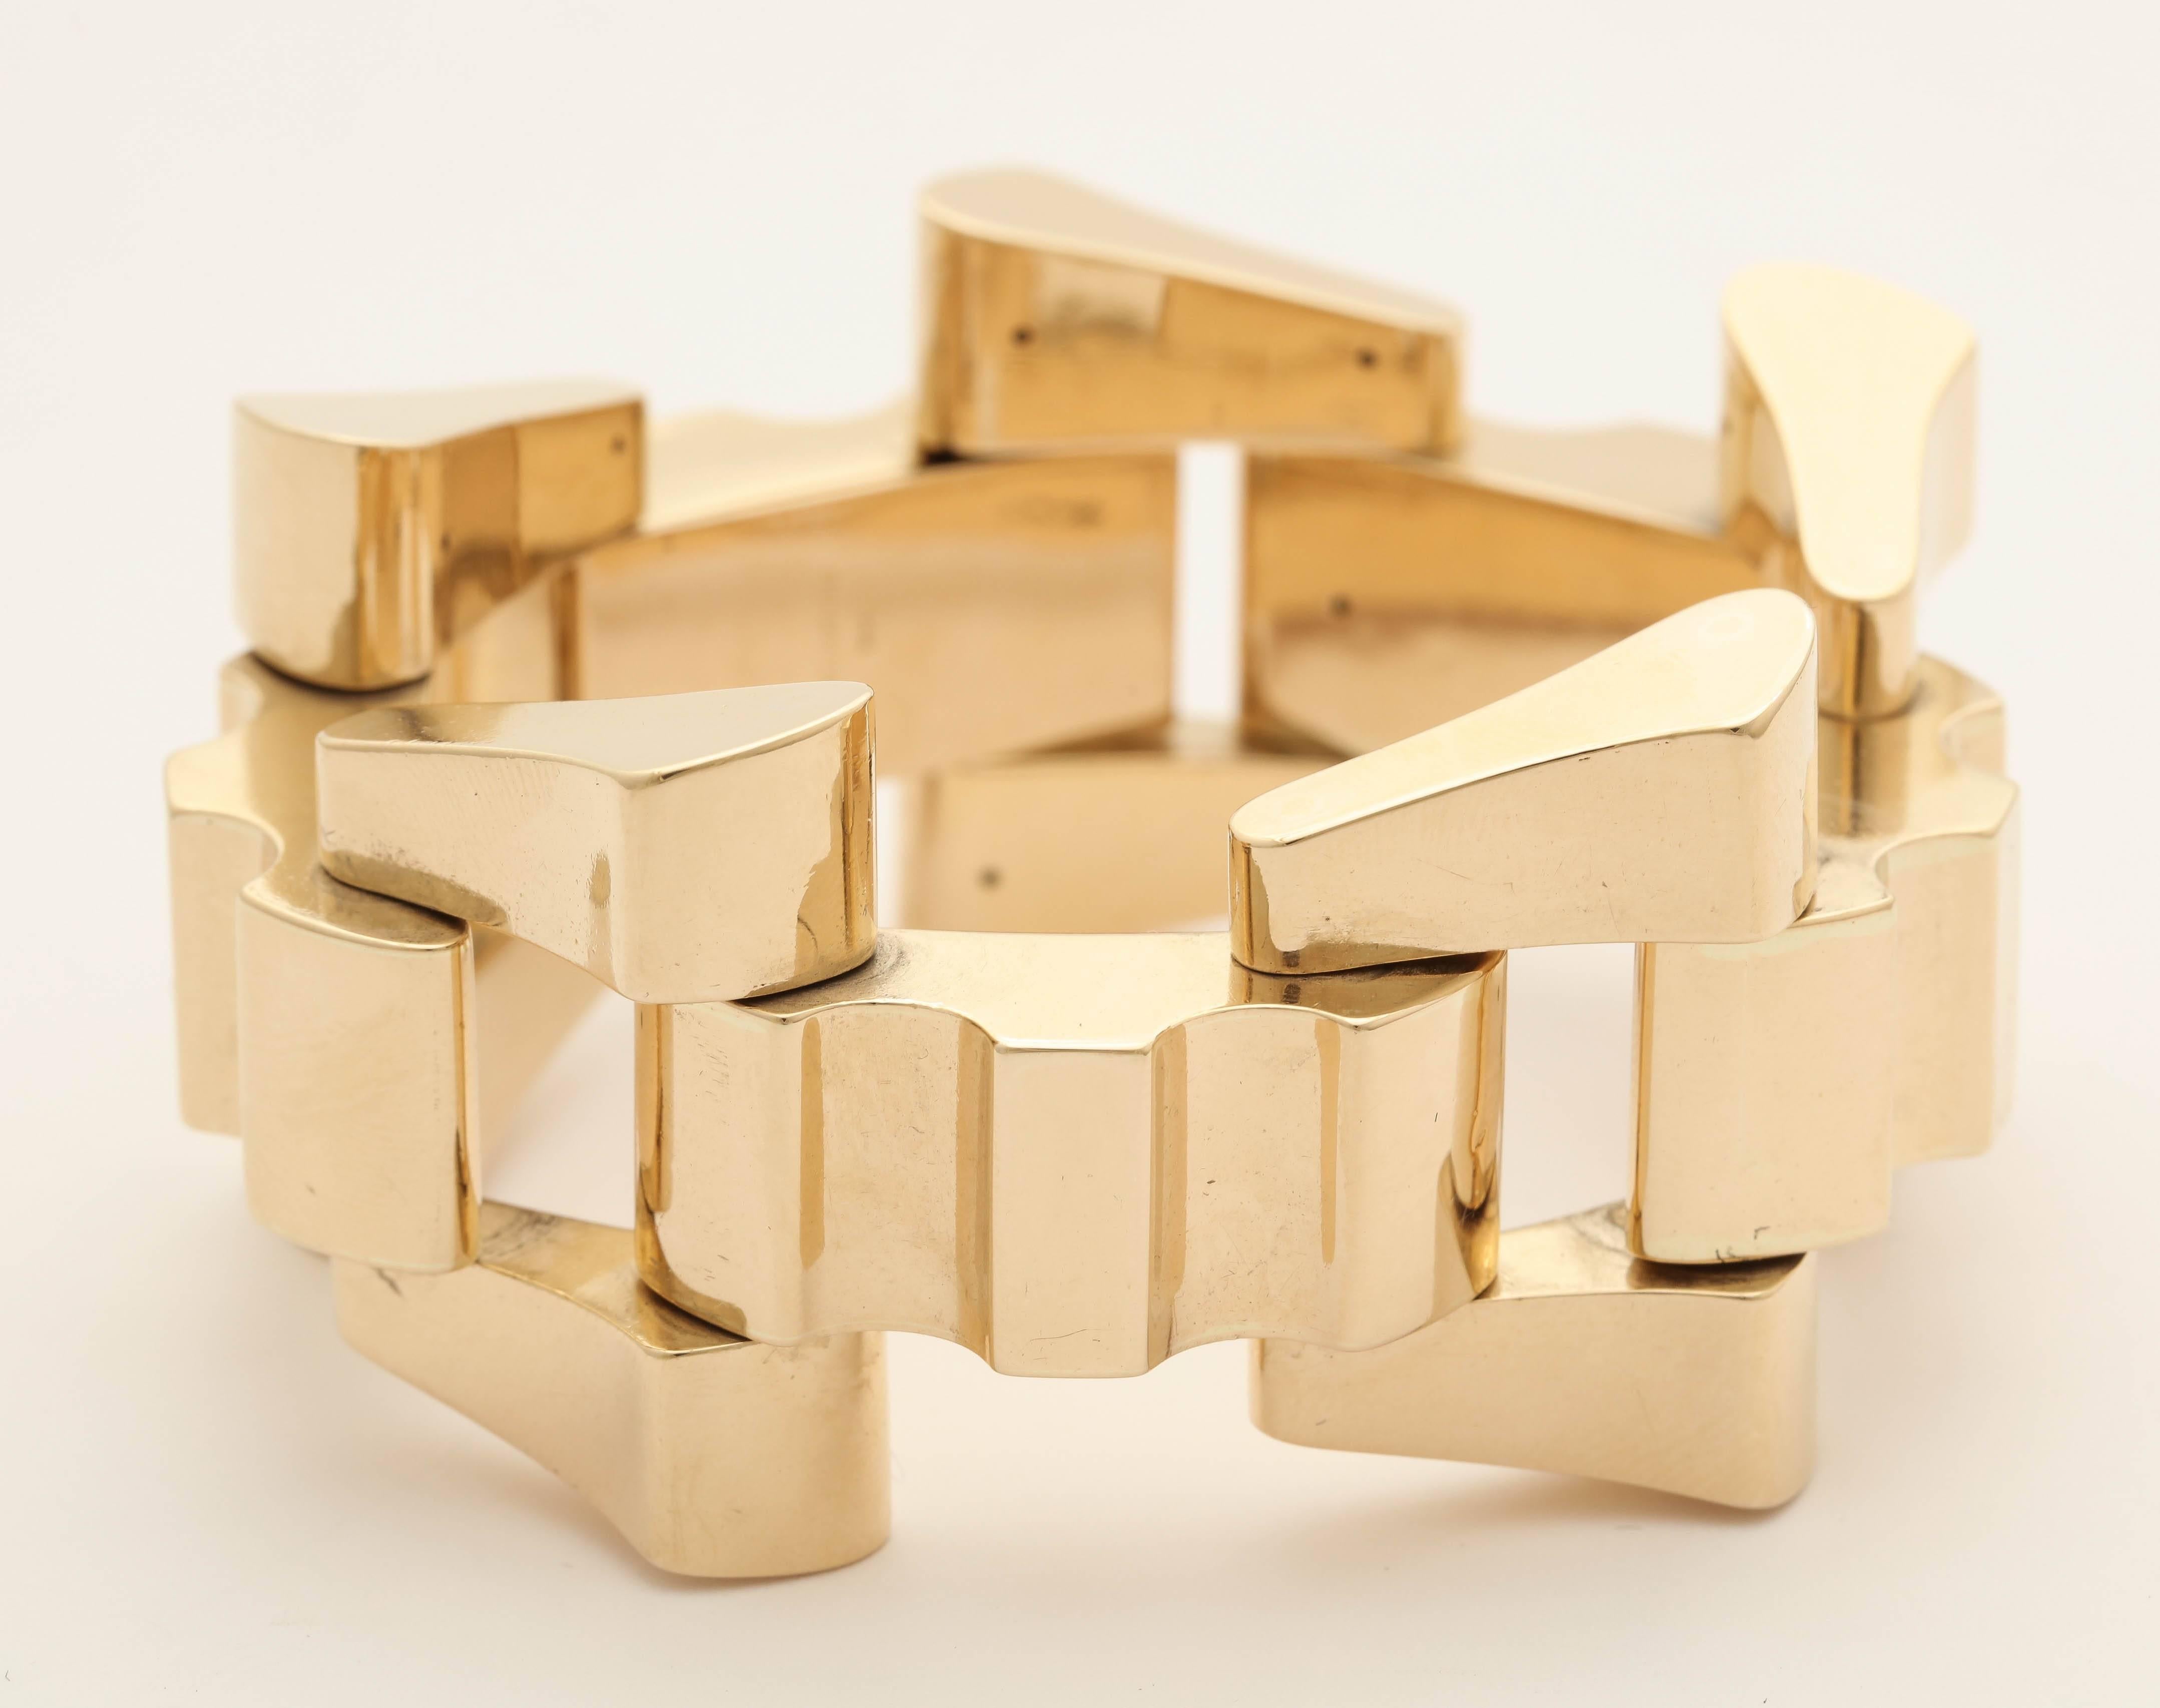 One Ladies Architectural And Flexible High Polish 14kt Yellow Gold Open Link Geometric Bracelet Designed For The Contemporary And Chic Woman. This Bracelet Is The Perfect Fit For An Everyday Wear And Goes With Every Attire And Fits Into a Dressy Or